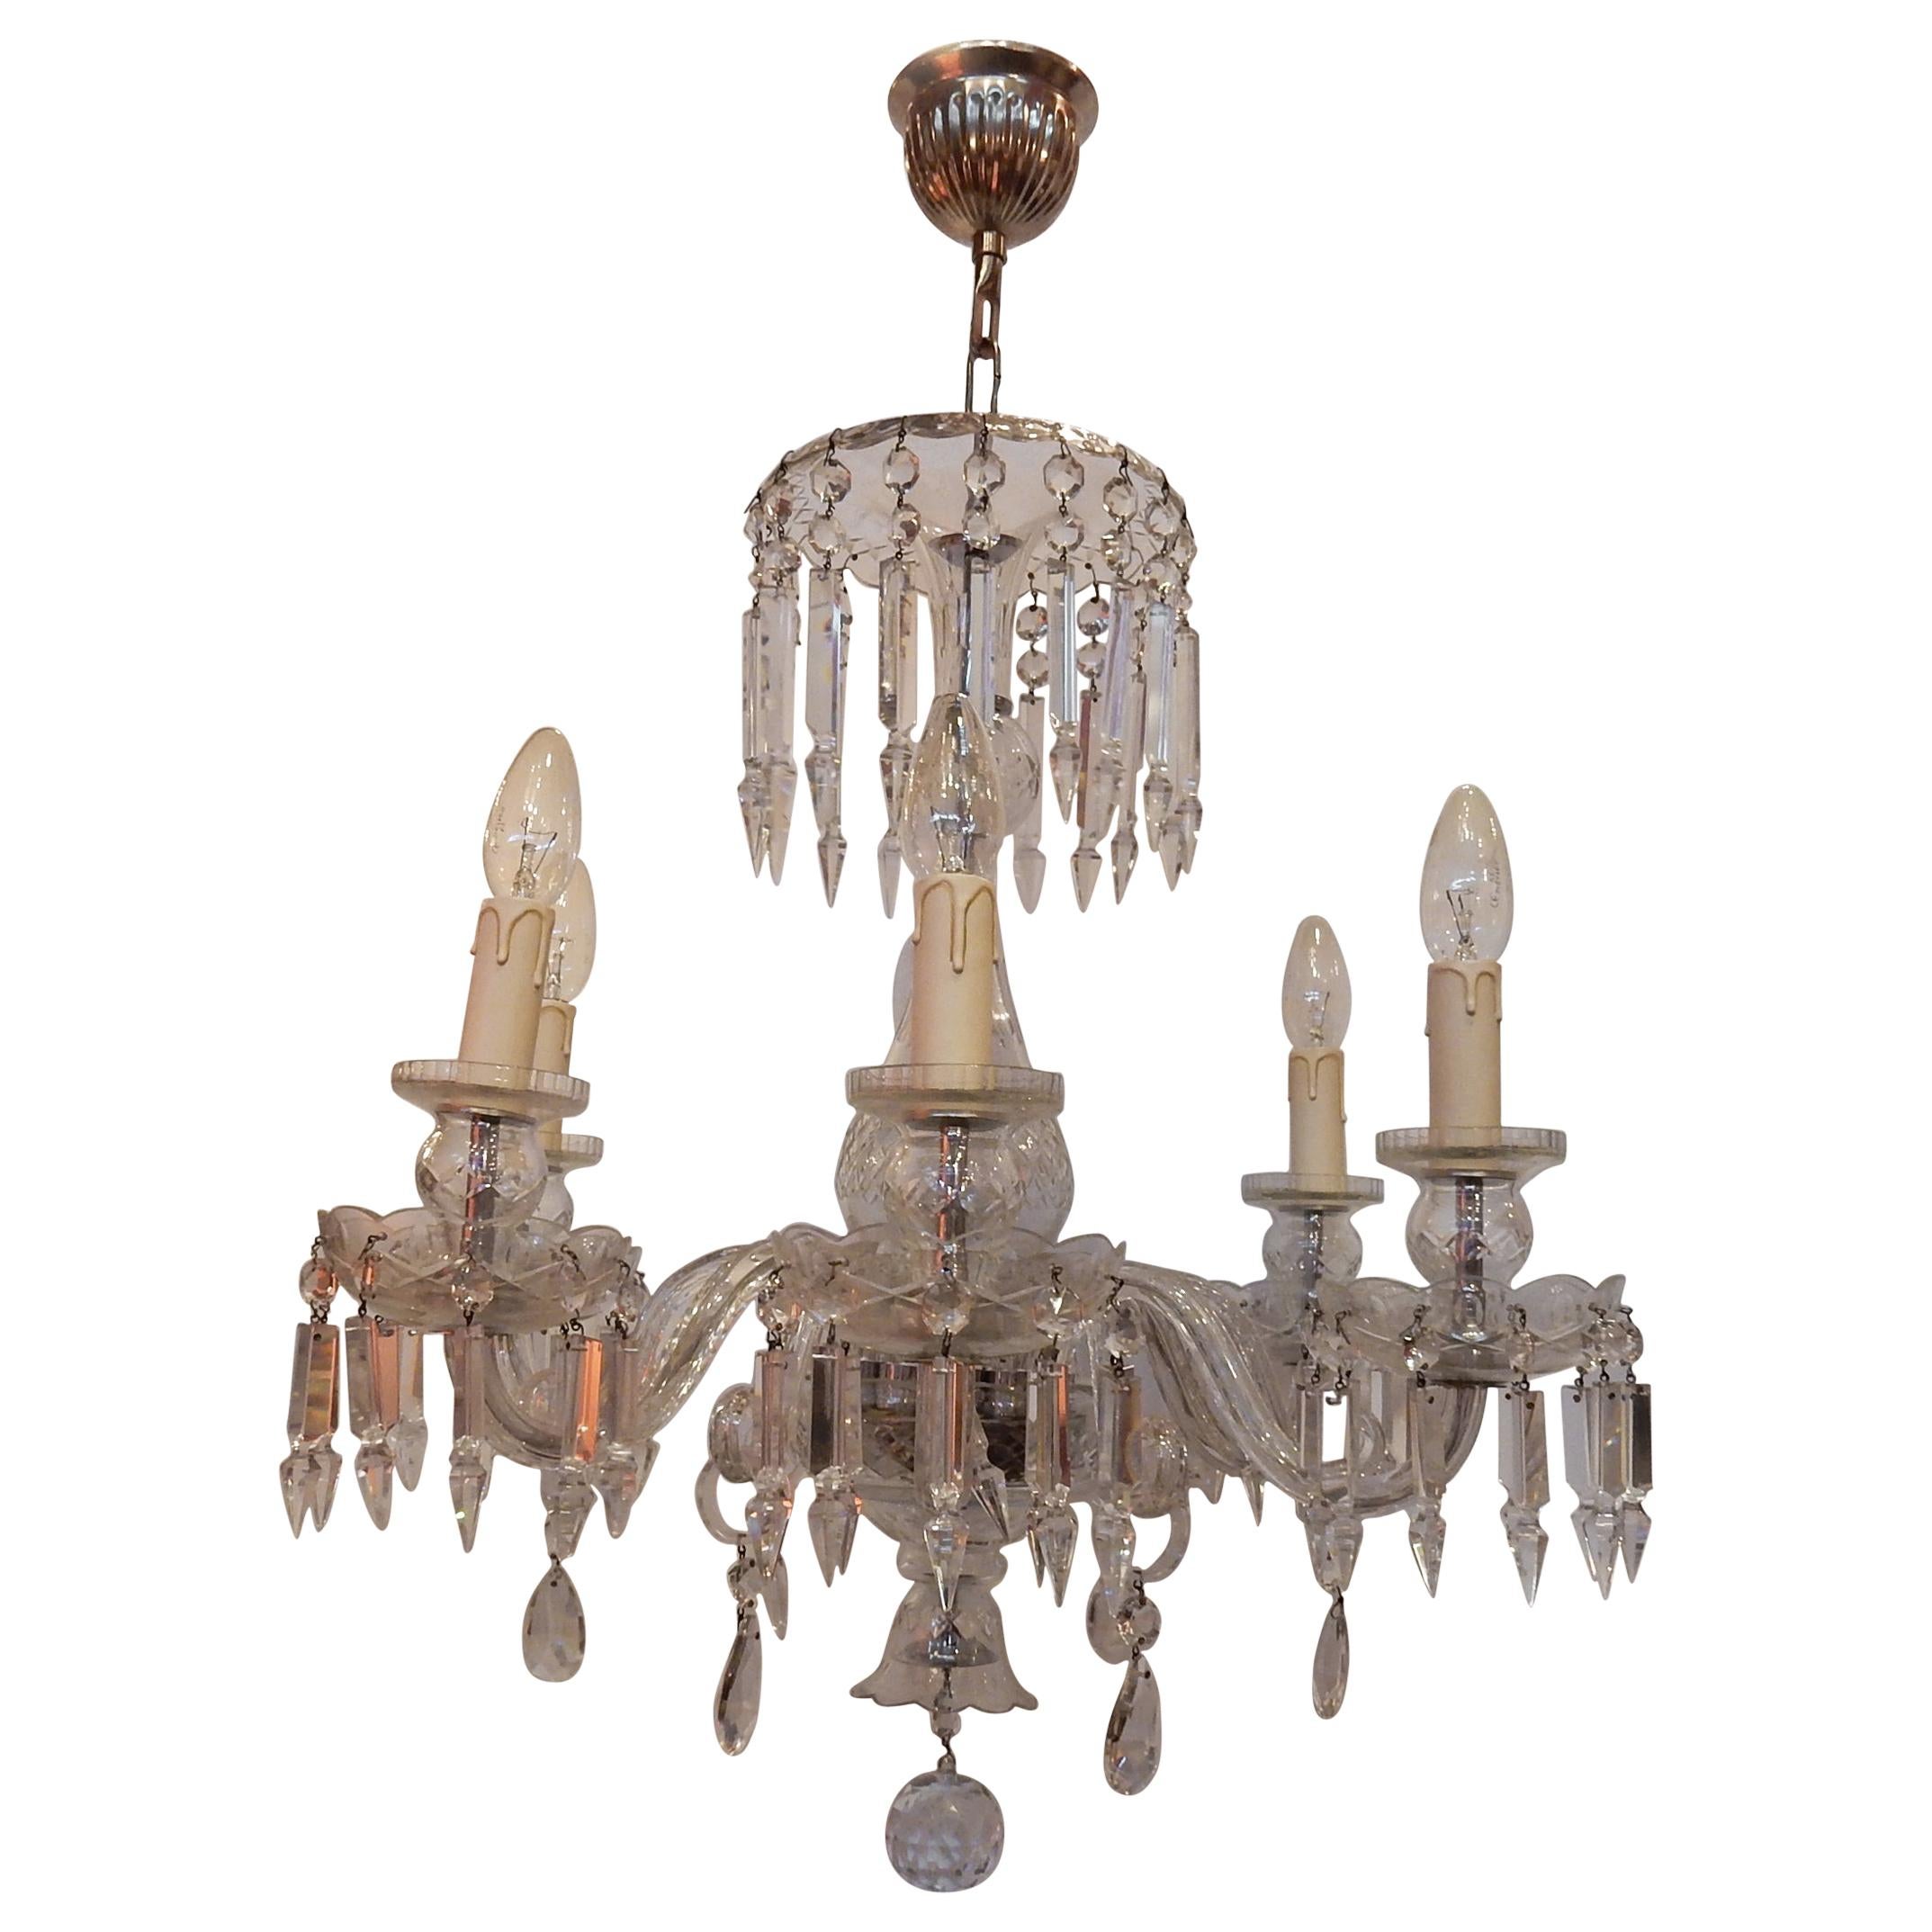 1920-1940 Bohémian or Baccarat Crystal Chandelier 6 Arms